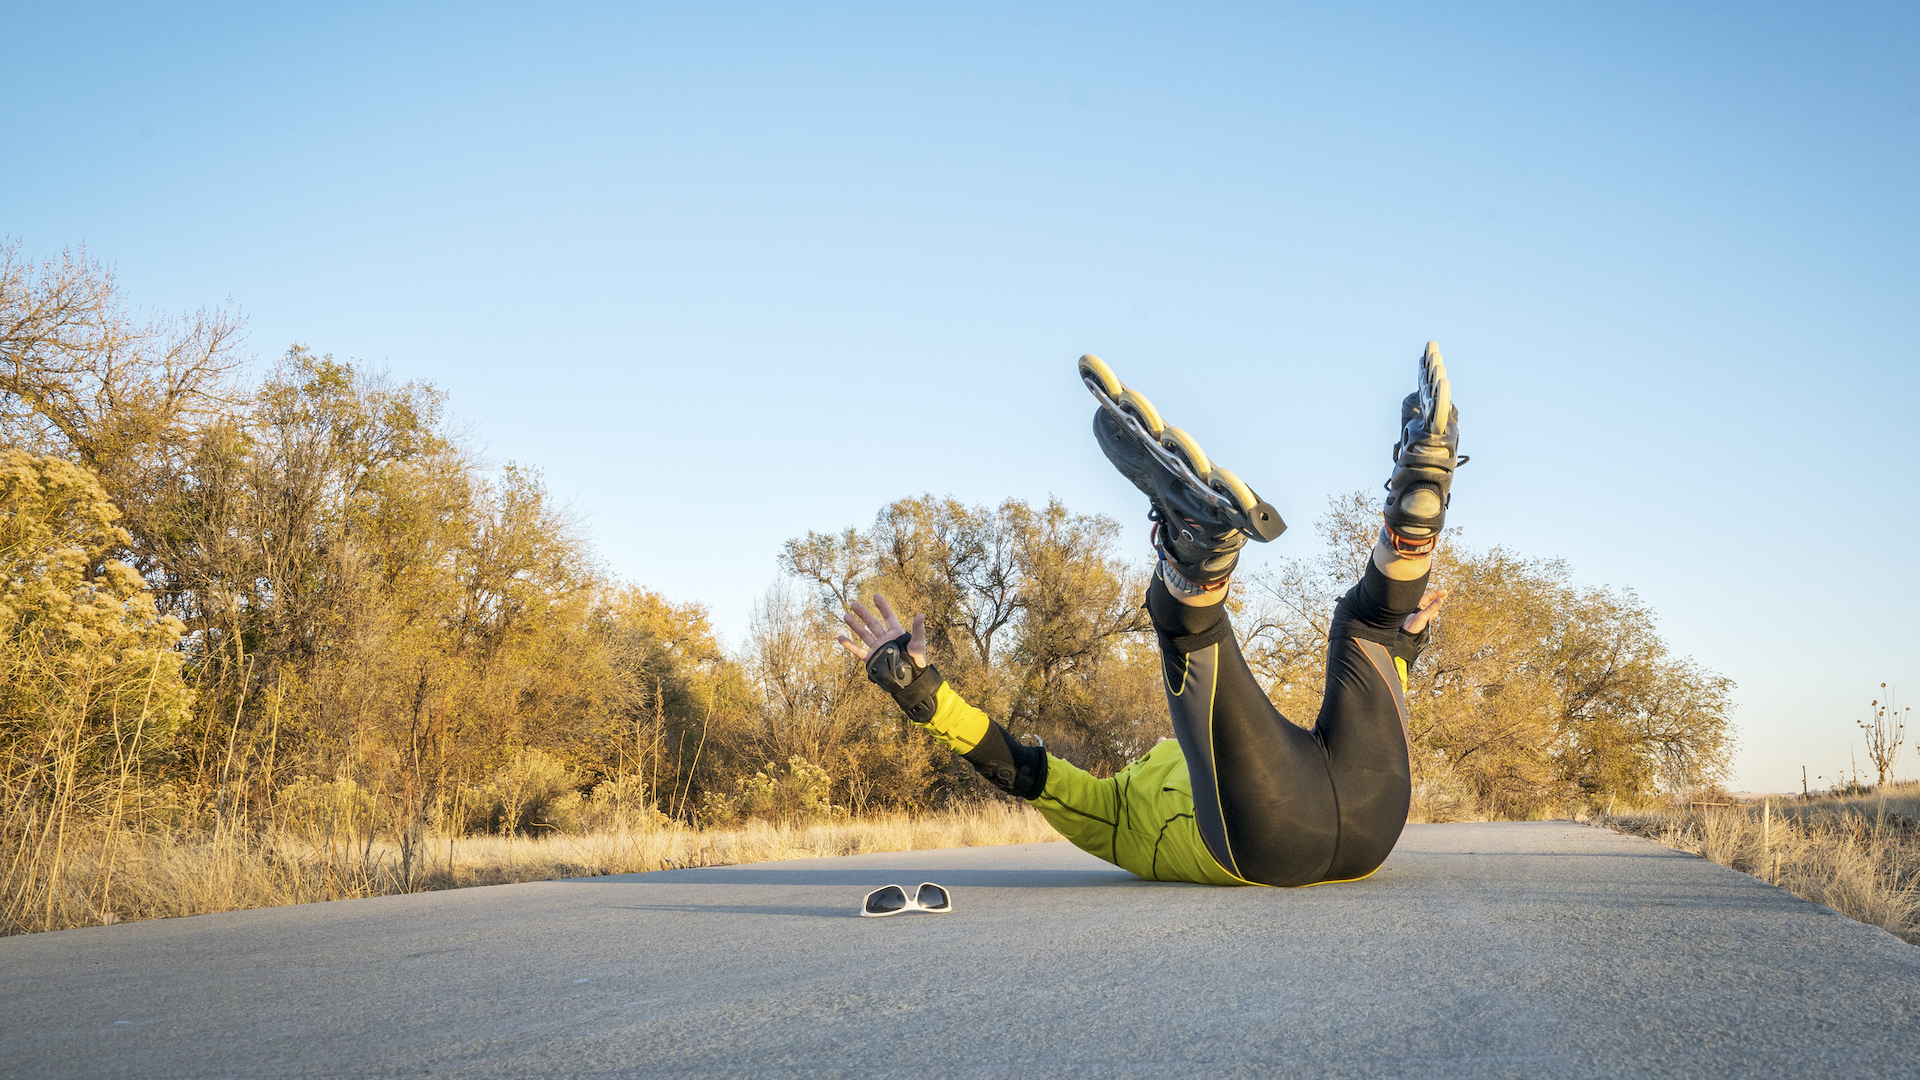 A person falling over during a rollerblading adventure 